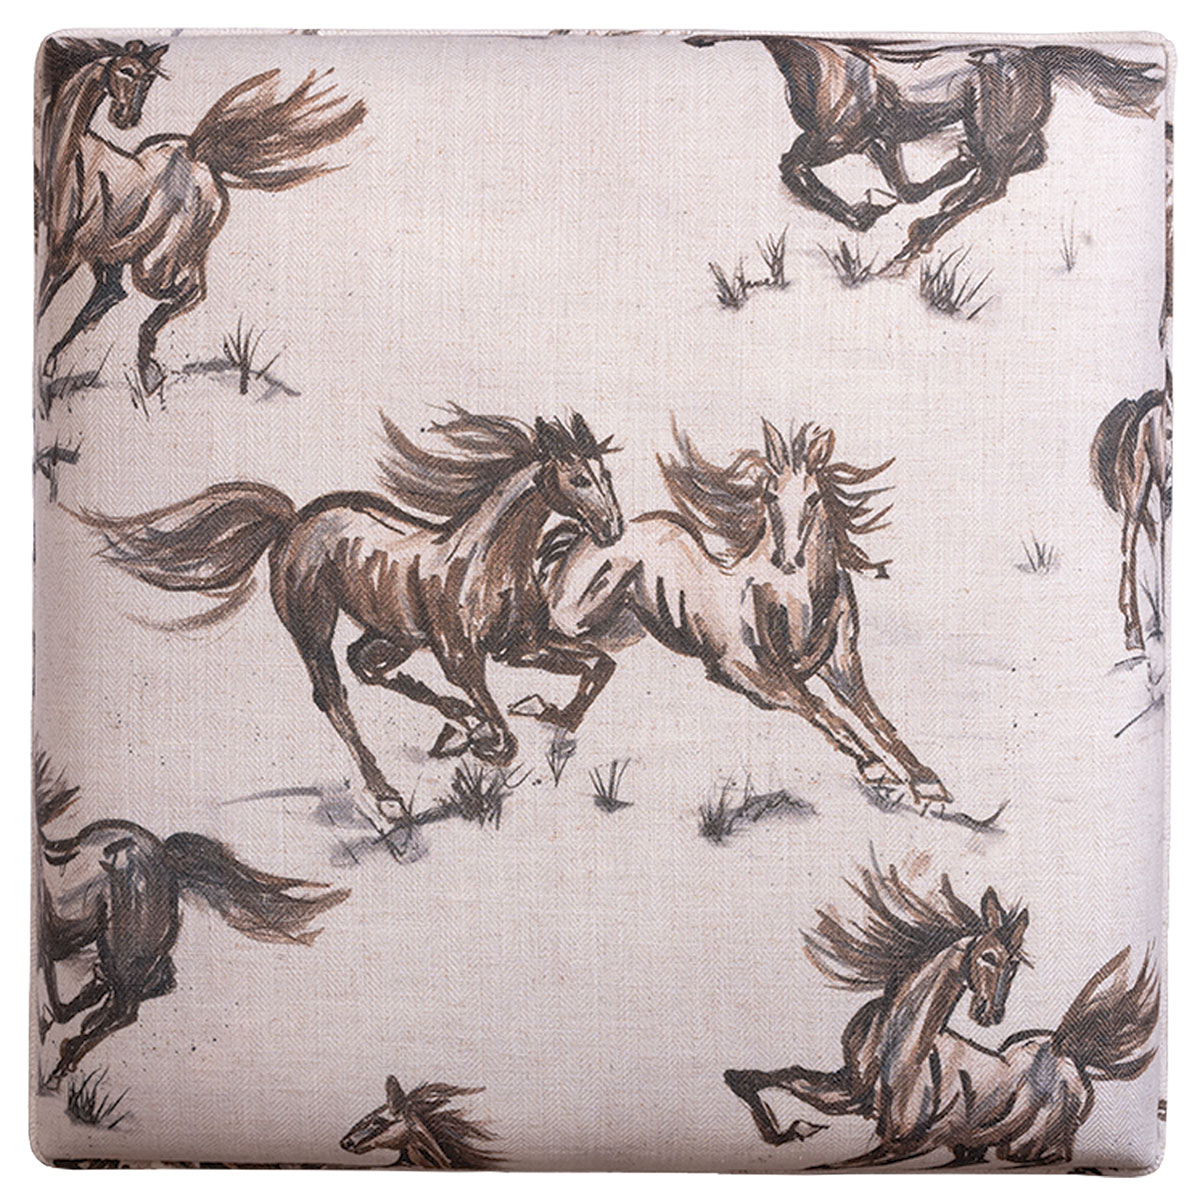 Monty Stool in Horse Fabric - Mecox Gardens